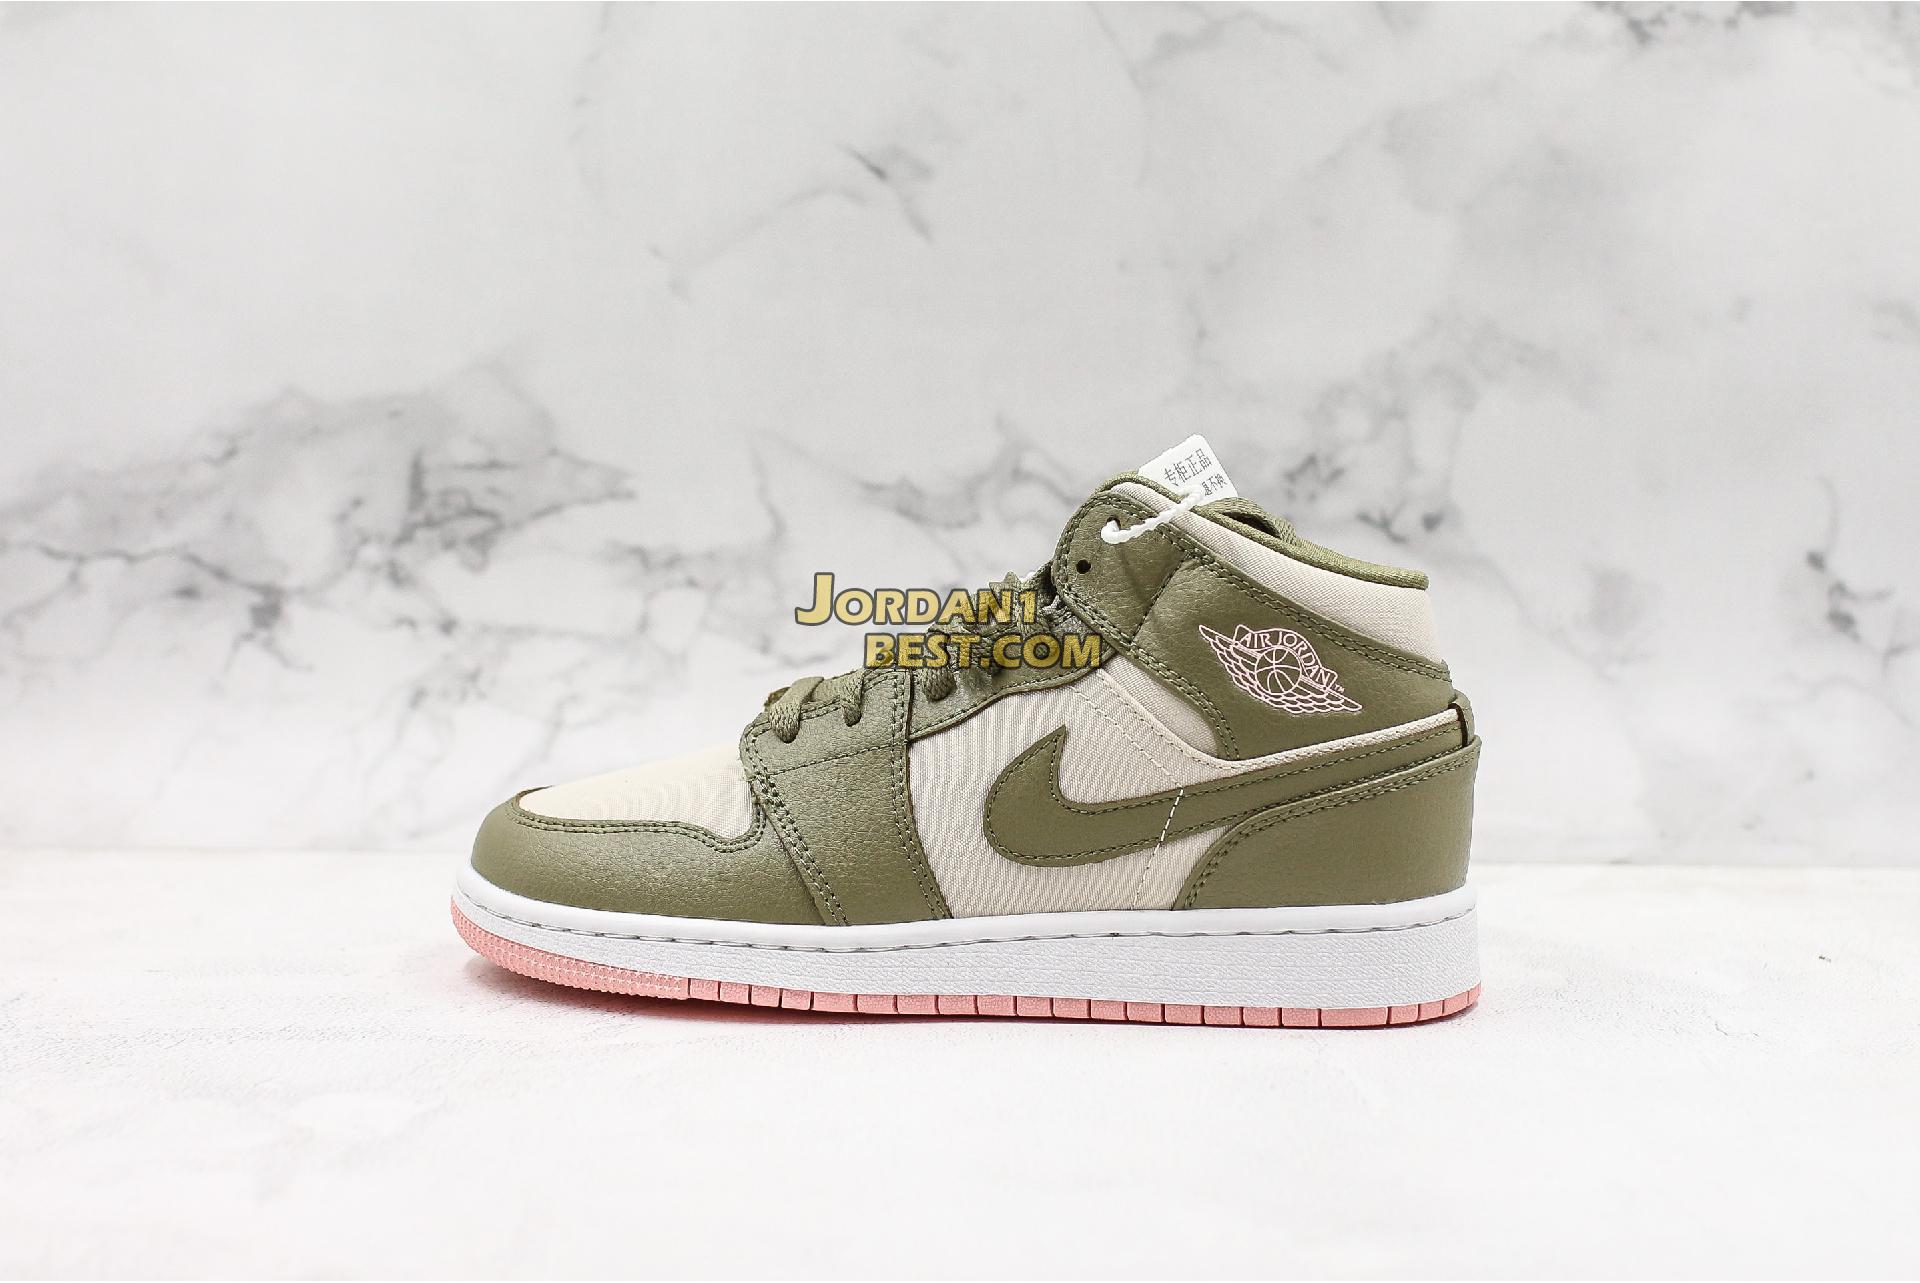 AAA Quality Air Jordan 1 Mid GG "Bleached Coral" 555112-225 Womens trooper/bleached coral Shoes replicas On Wholesale Sale Online